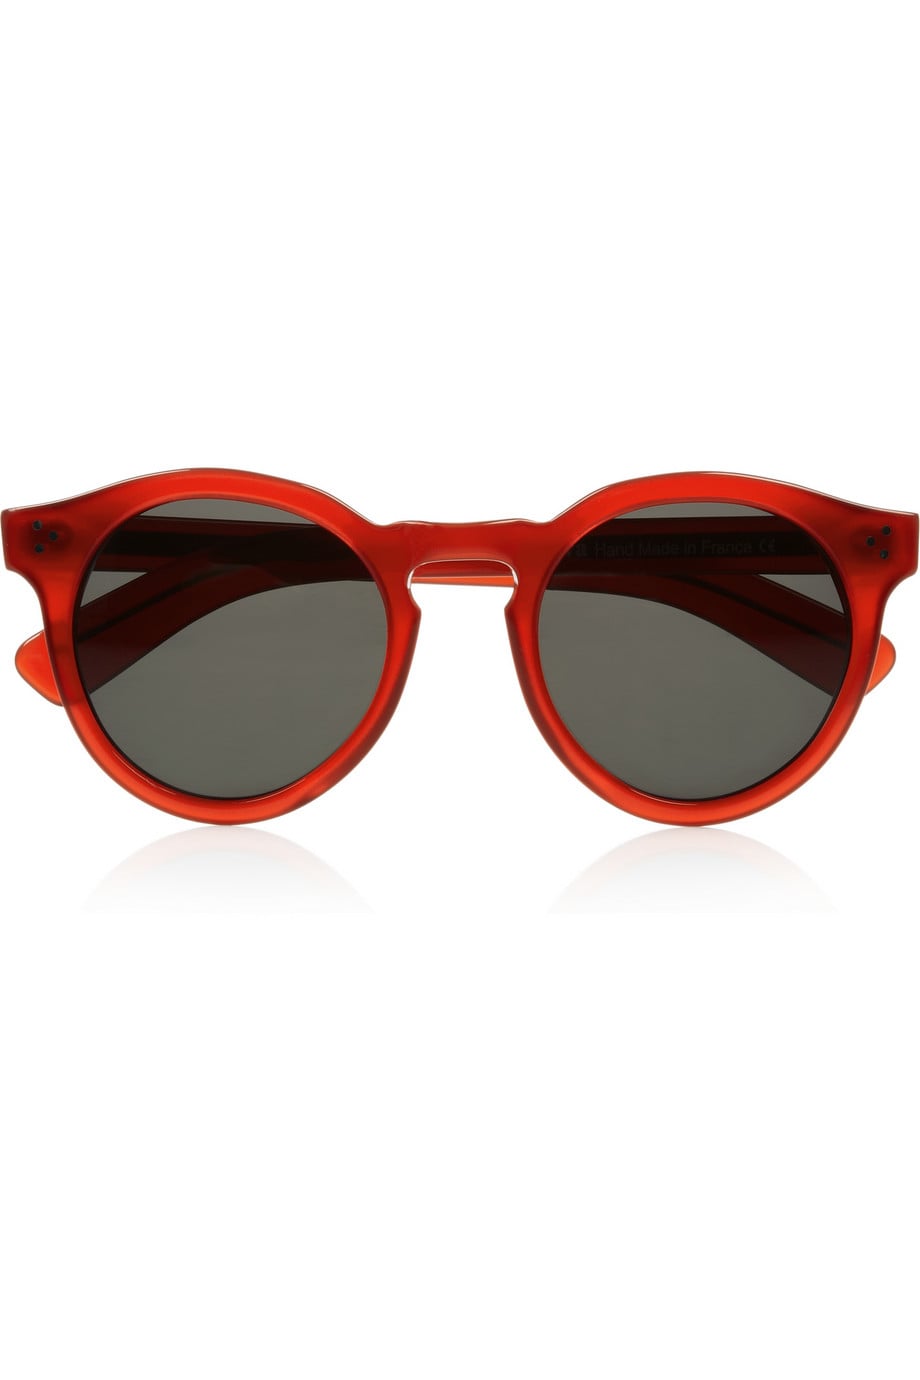 Illesteva's Leonard 2 Round-Frame Sunglasses ($260) are one small step away from being heart-shaped, which I absolutely adore — plus, they'll add a fun, playful vibe to all of my cold-weather looks.
— Brittney Stephens, assistant editor